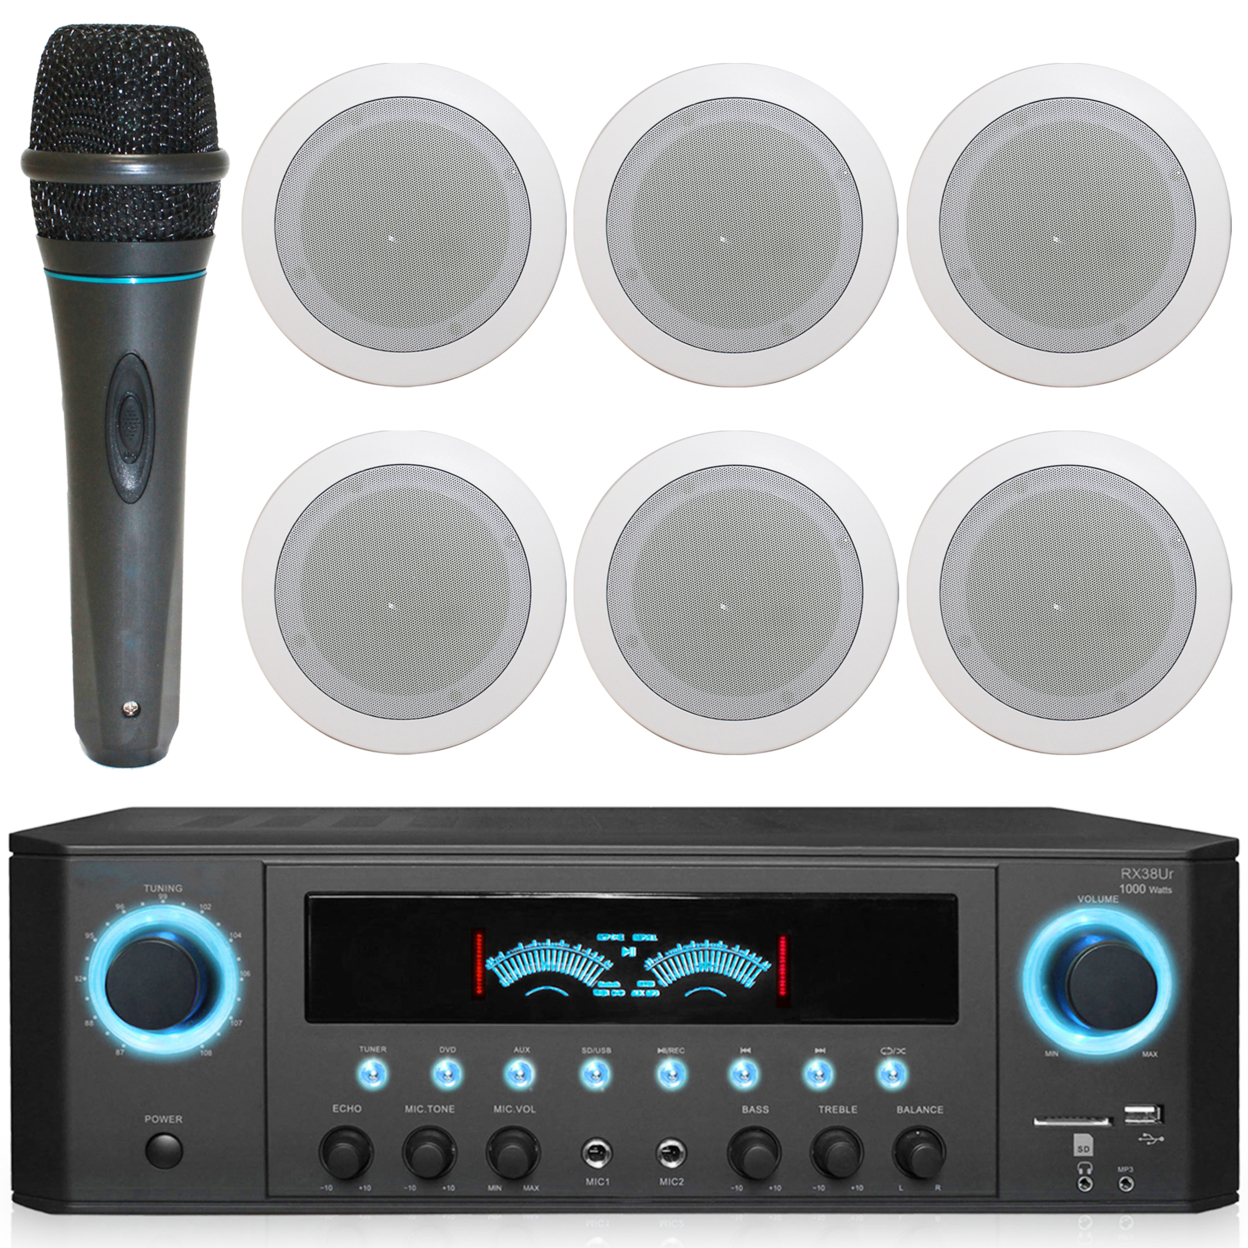 Technical Pro 1000W Bluetooth Home System W/USB/SD Inputs + (Qty 6) 6.5 Flush Mount In-Ceiling Stereo Speakers + Mic W/10 Ft Cable